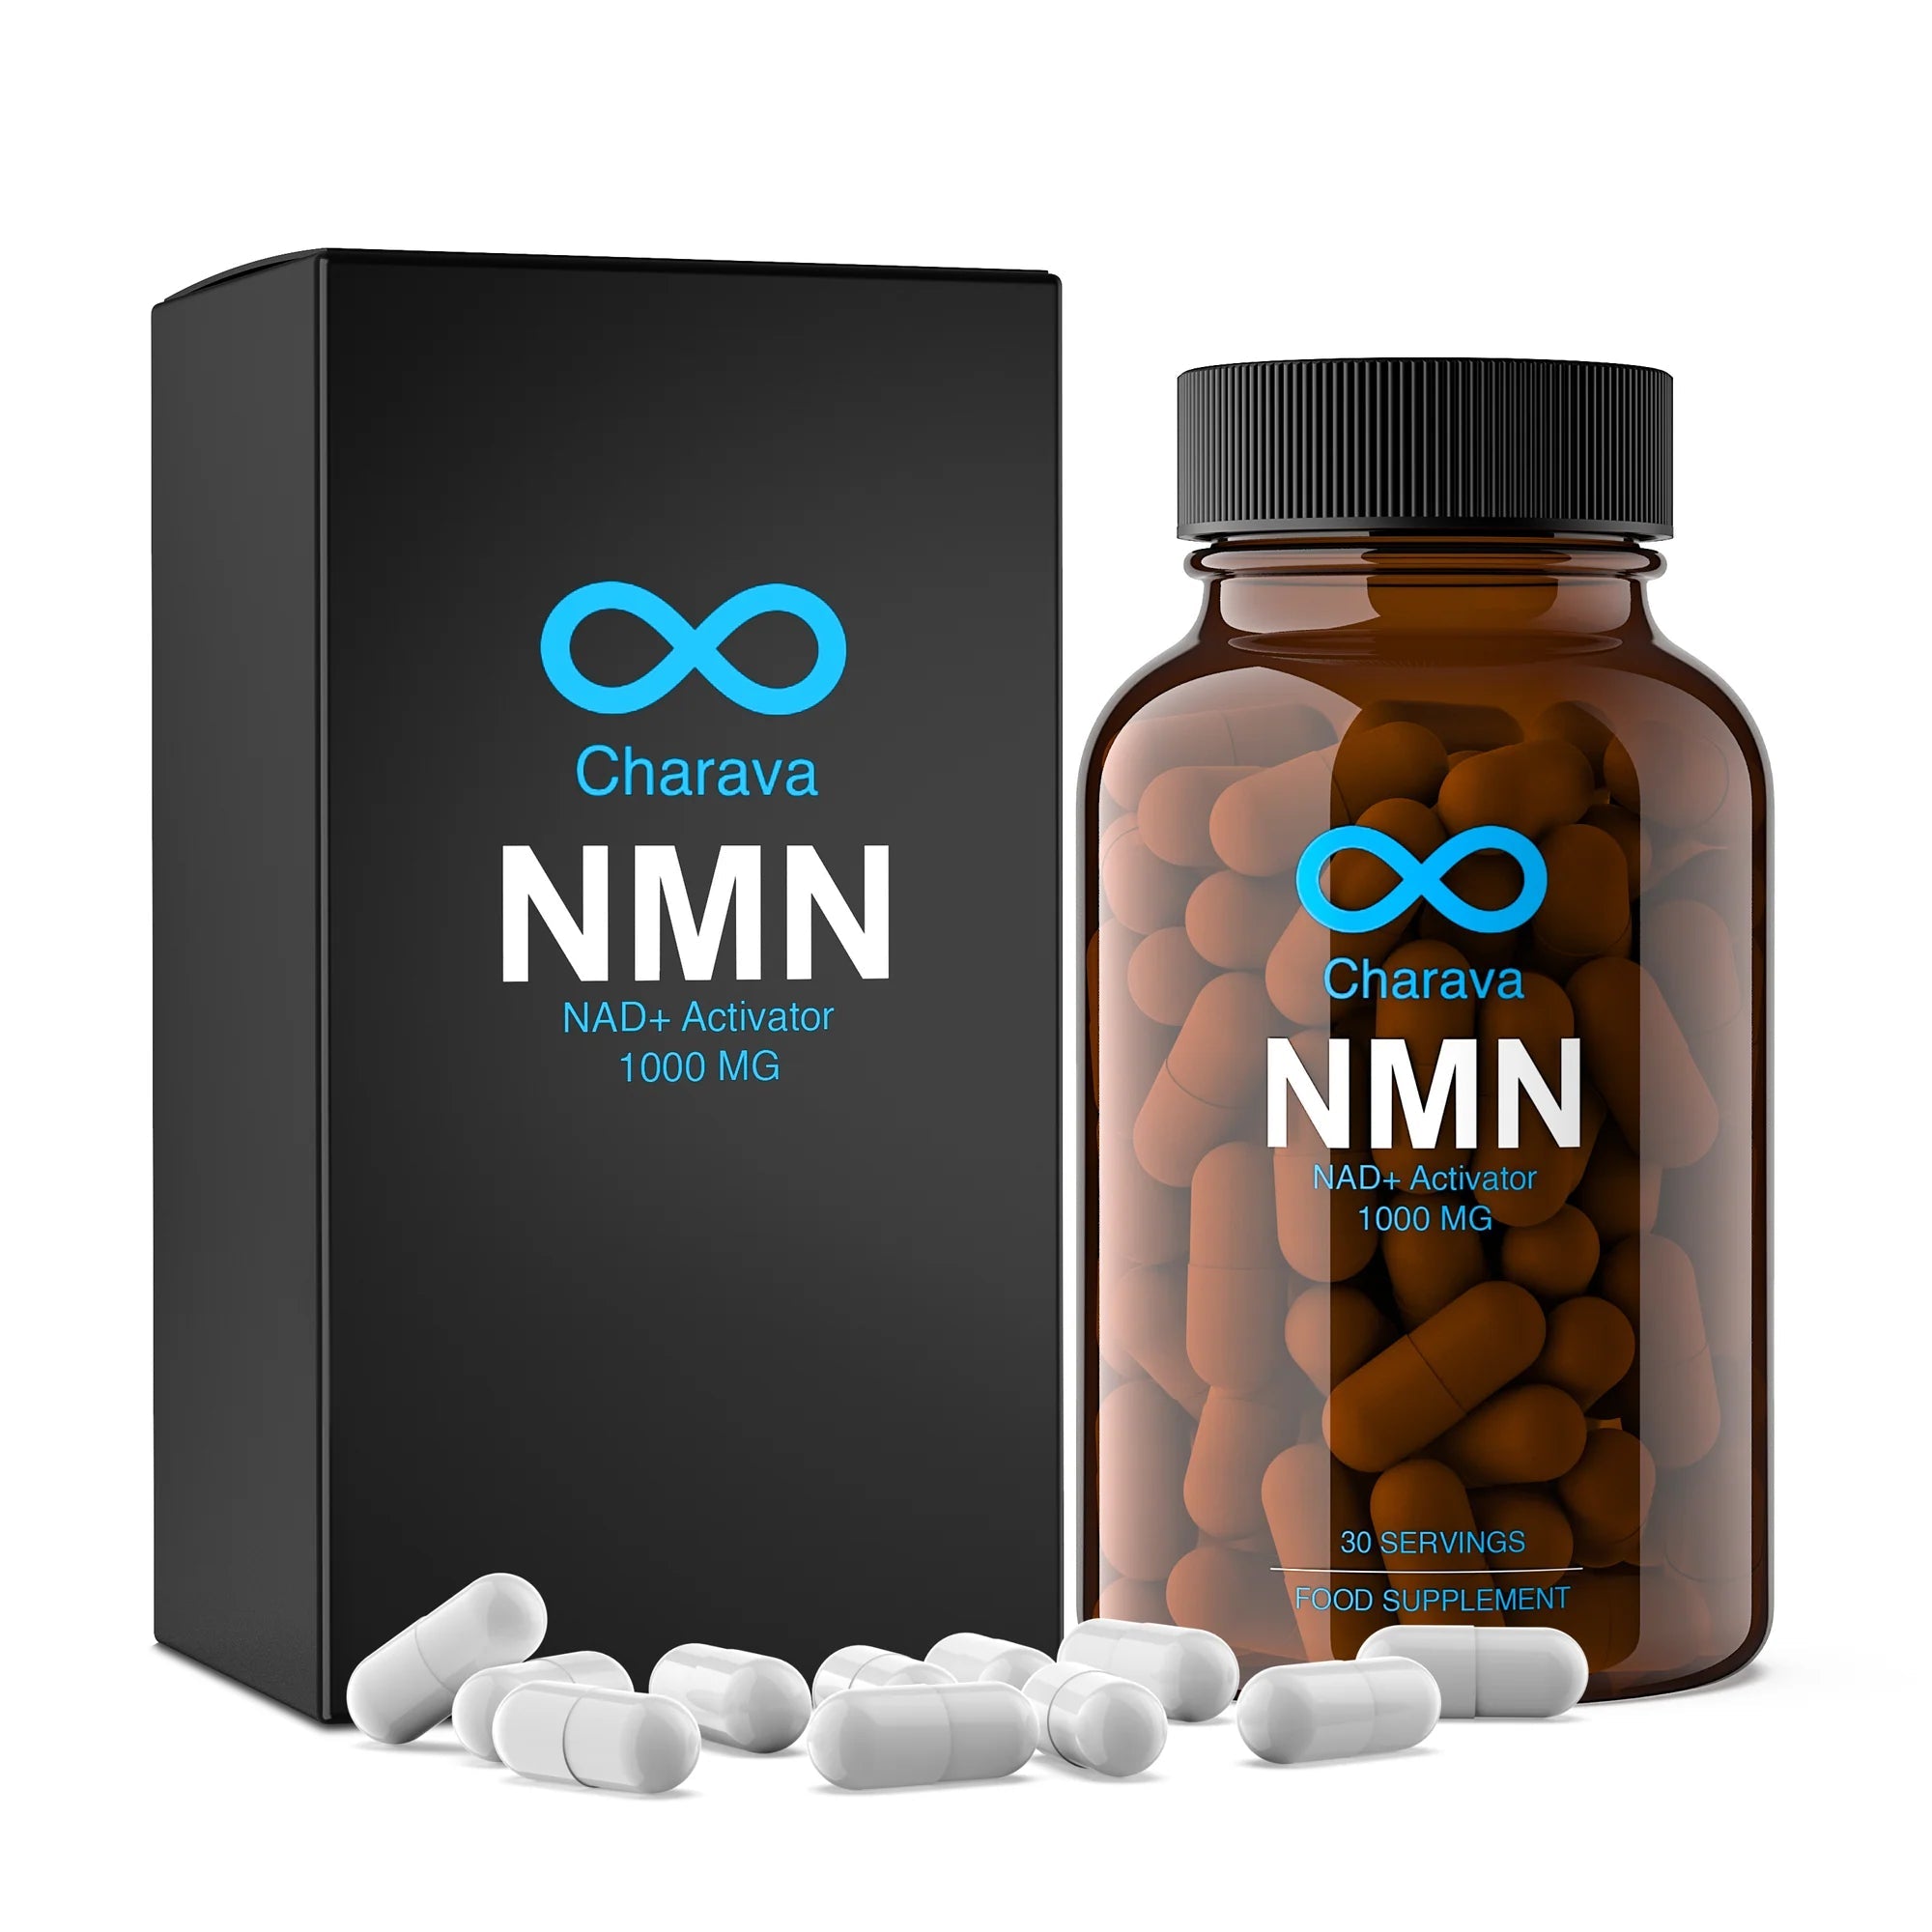 How to take NMN supplements - Charava UK